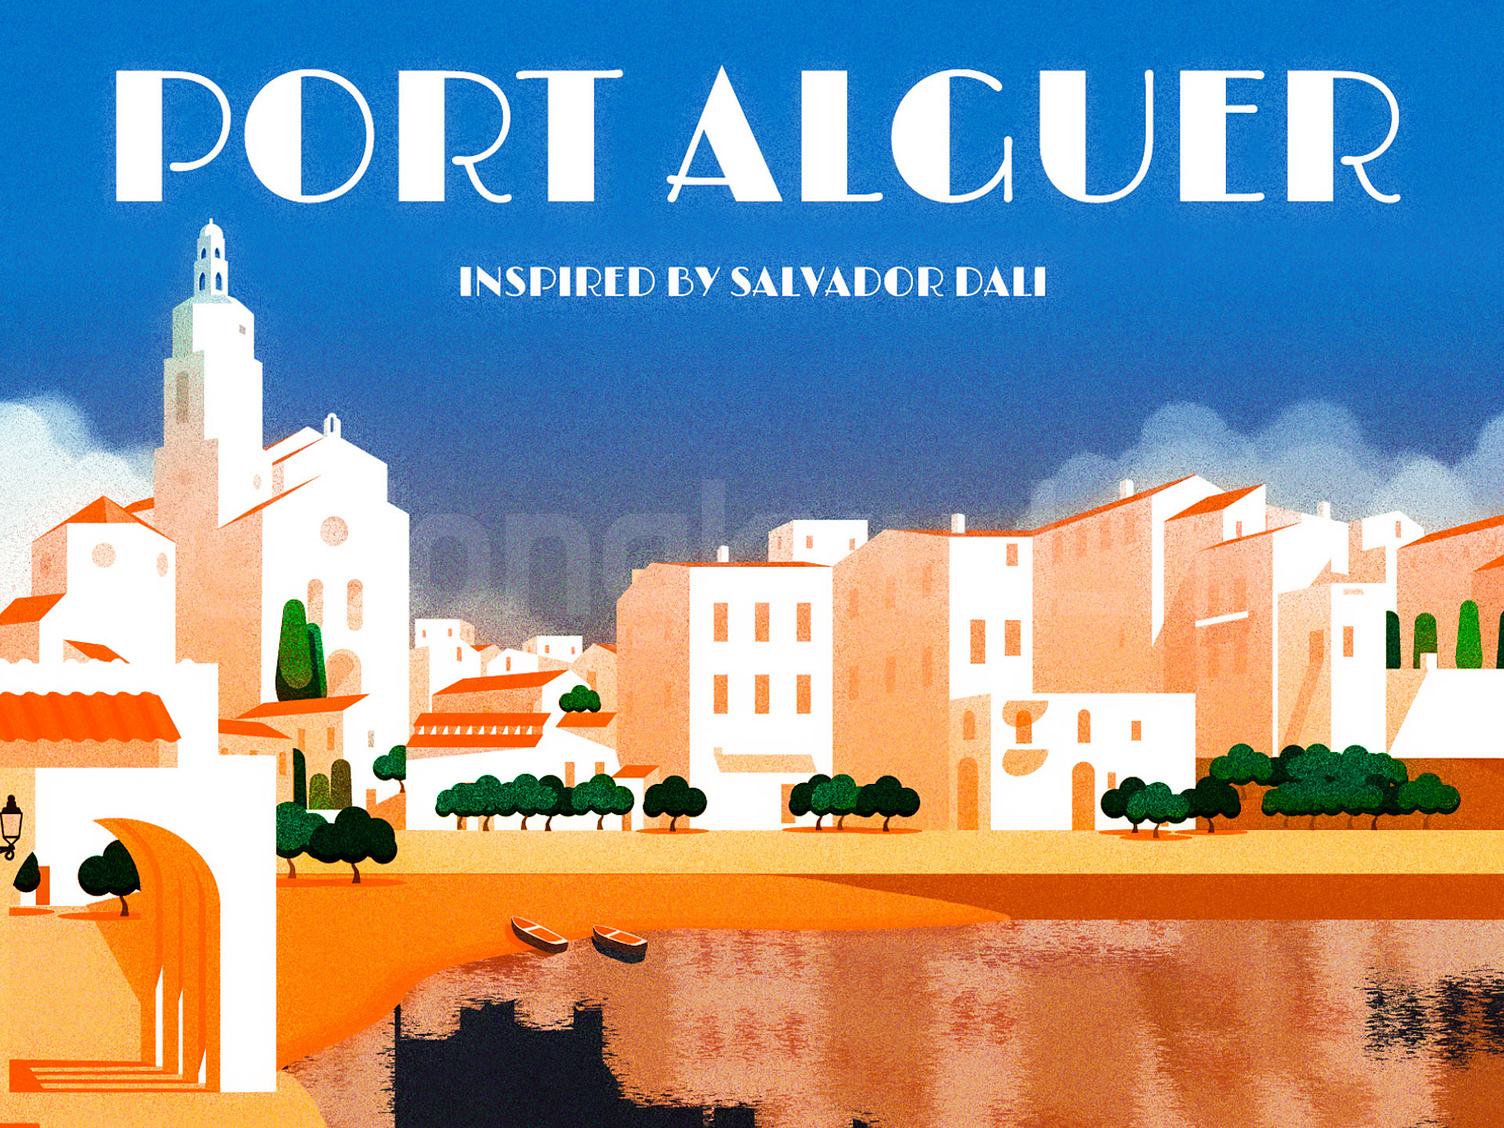 Port Alguer - Inspired by Salvador Dali by dongkyu lim on Dribbble